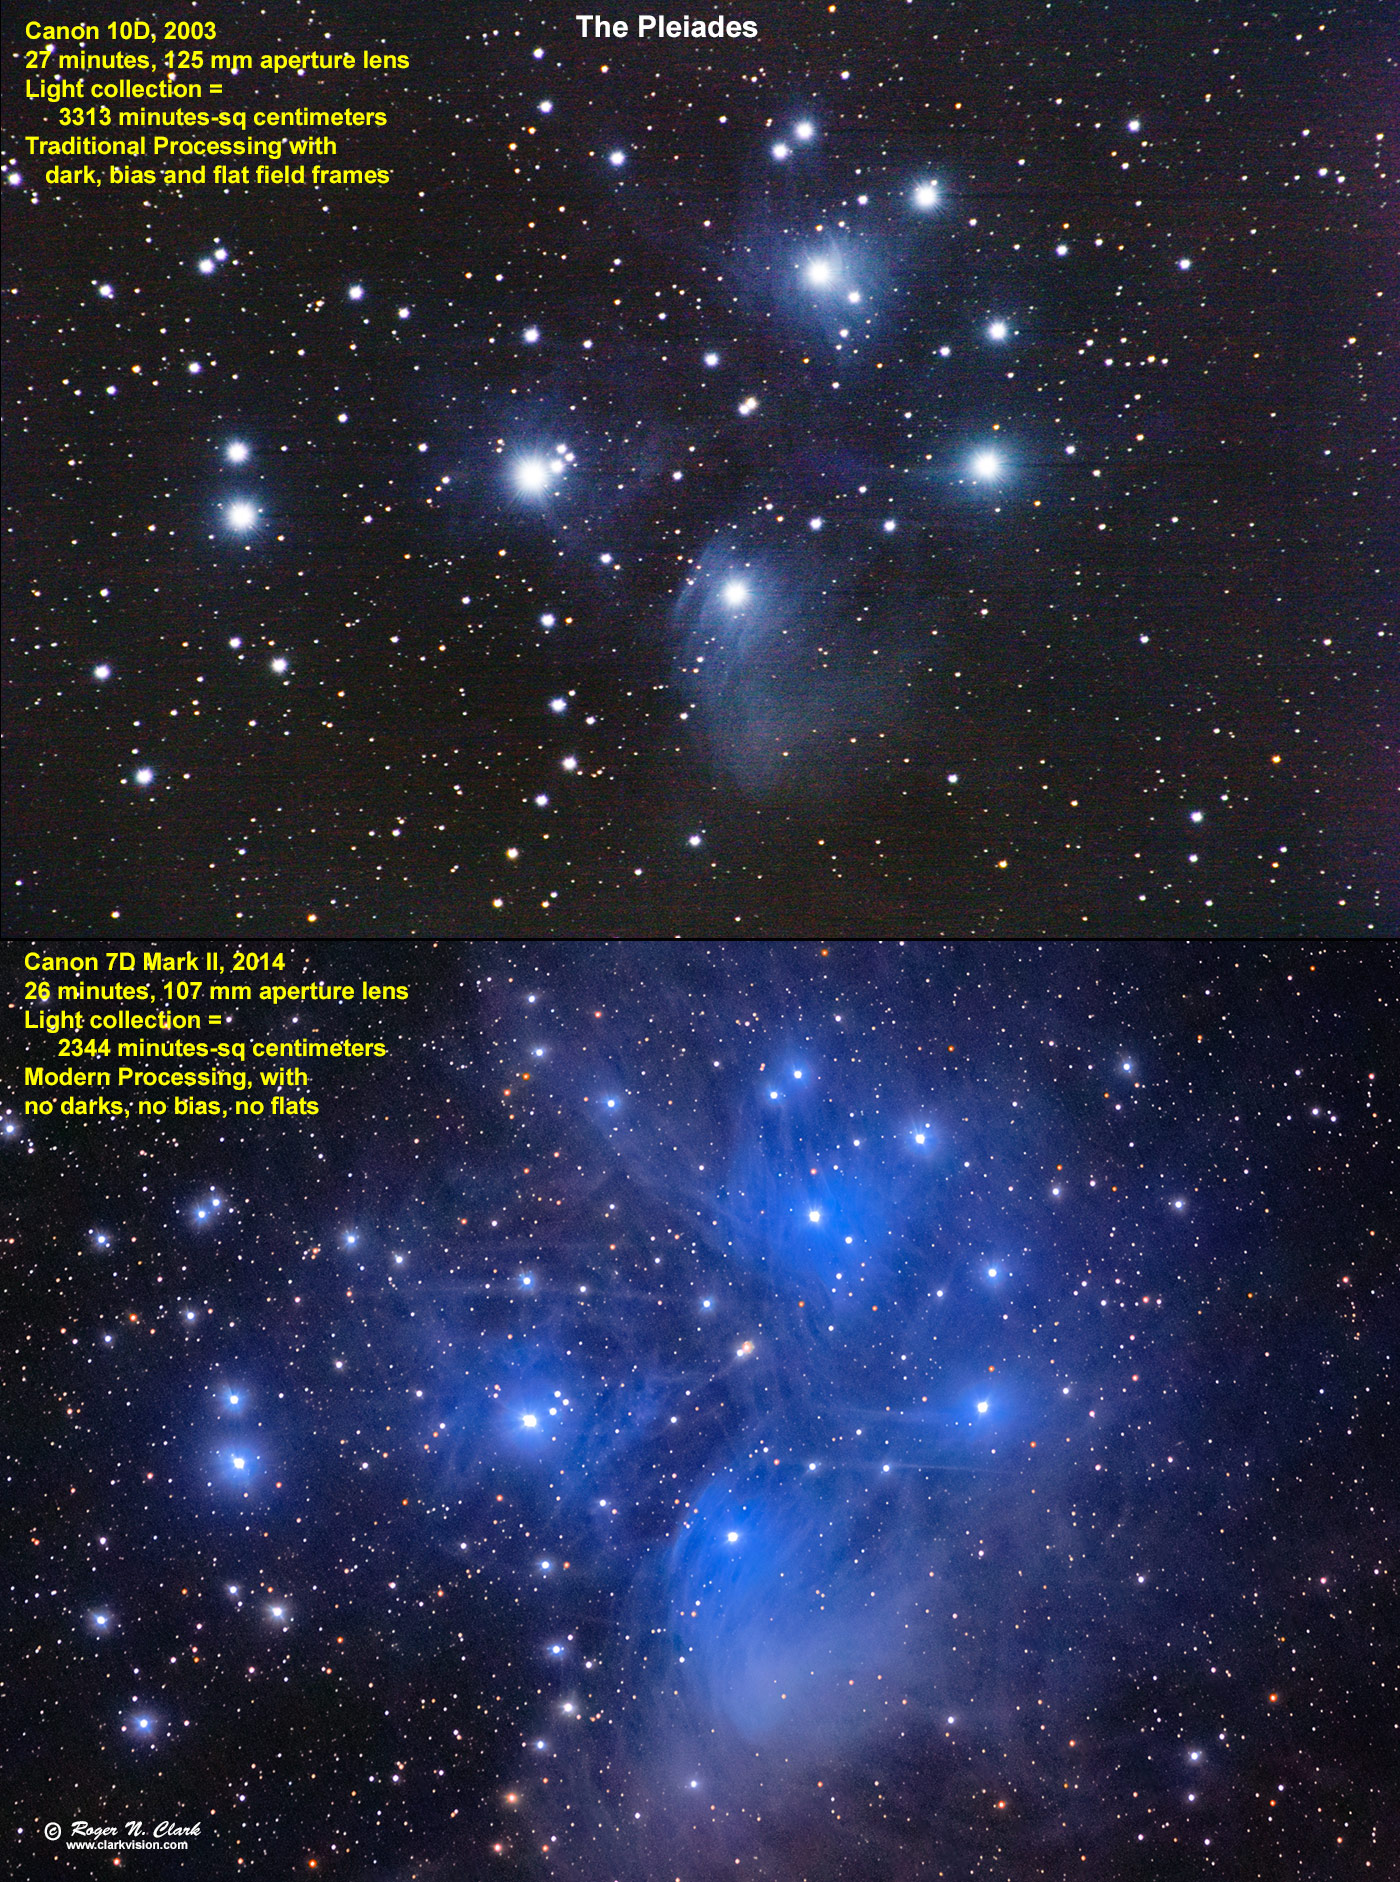 image pleiades.m45.rnclark.2014-tech-vs-2003-tech.a.jpg is Copyrighted by Roger N. Clark, www.clarkvision.com